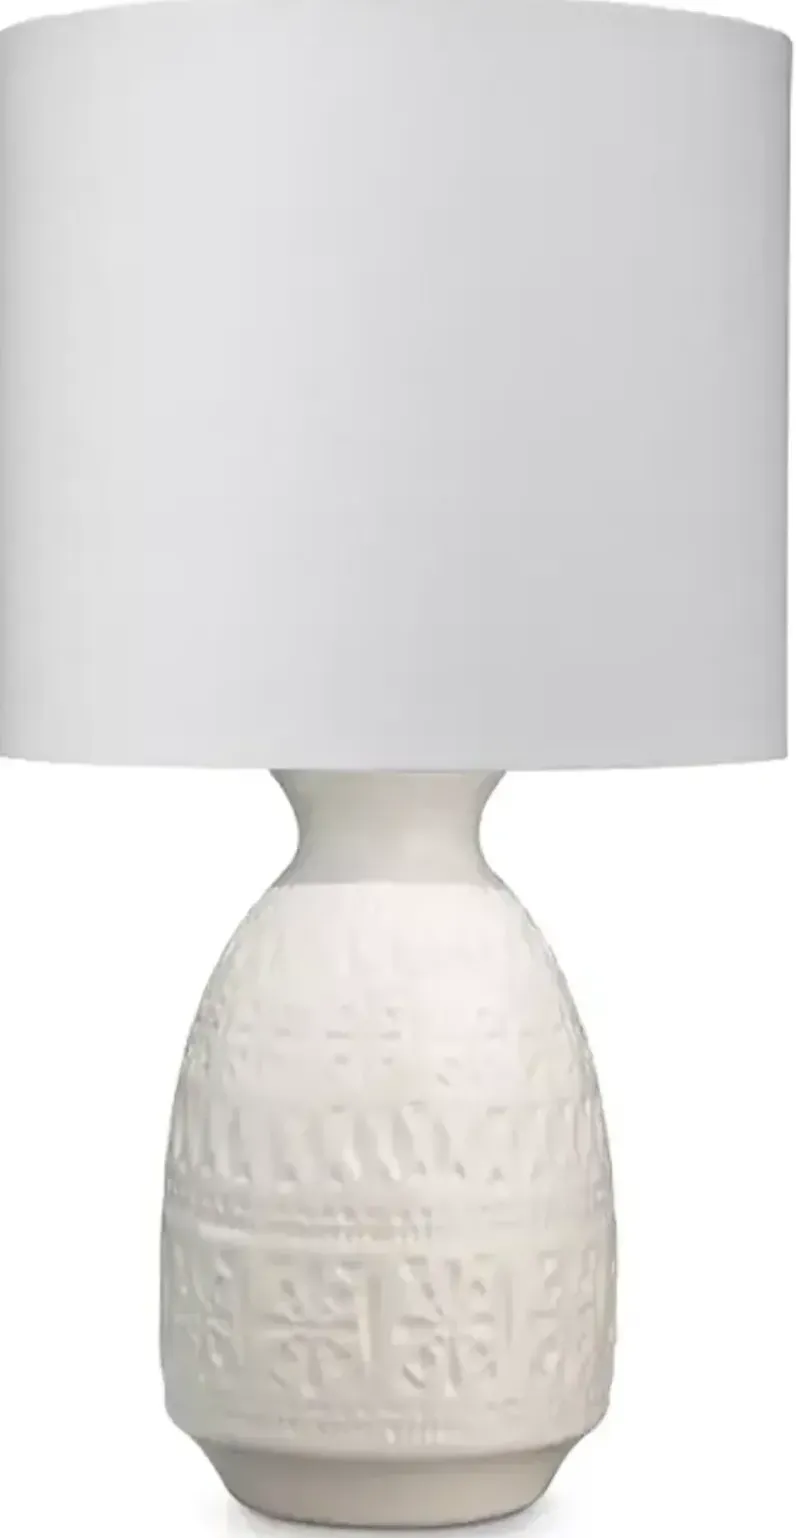 Bloomingdale's Frieze Table Lamp - 100% Exclusive